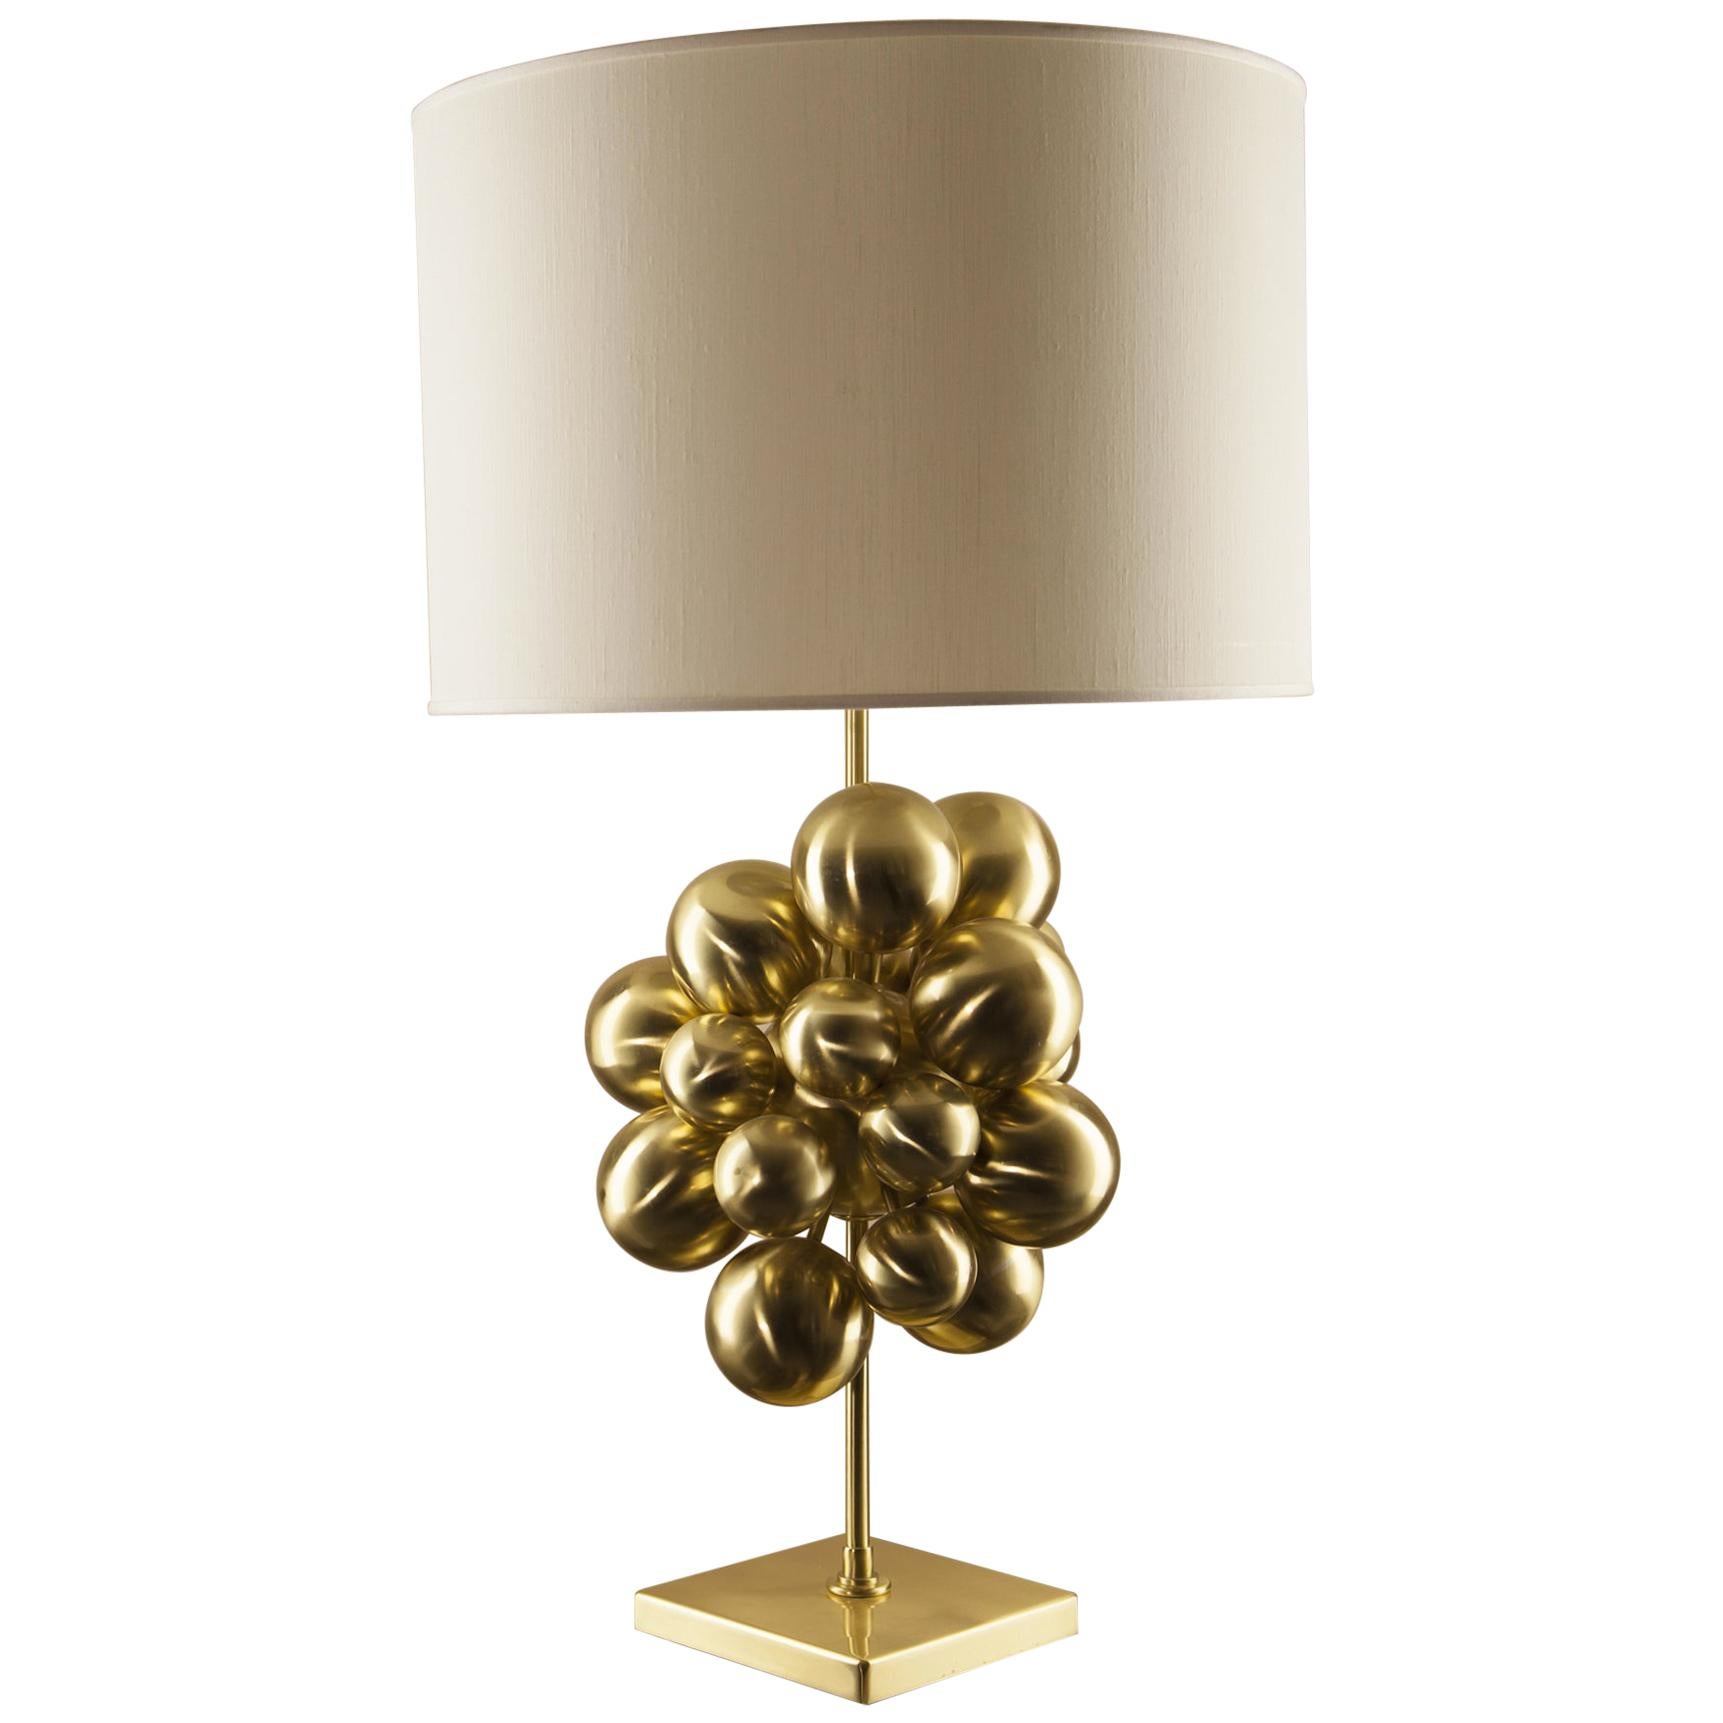 Plutone Table Lamp, Solid Brass Spheres, Florence Italy Production For Sale